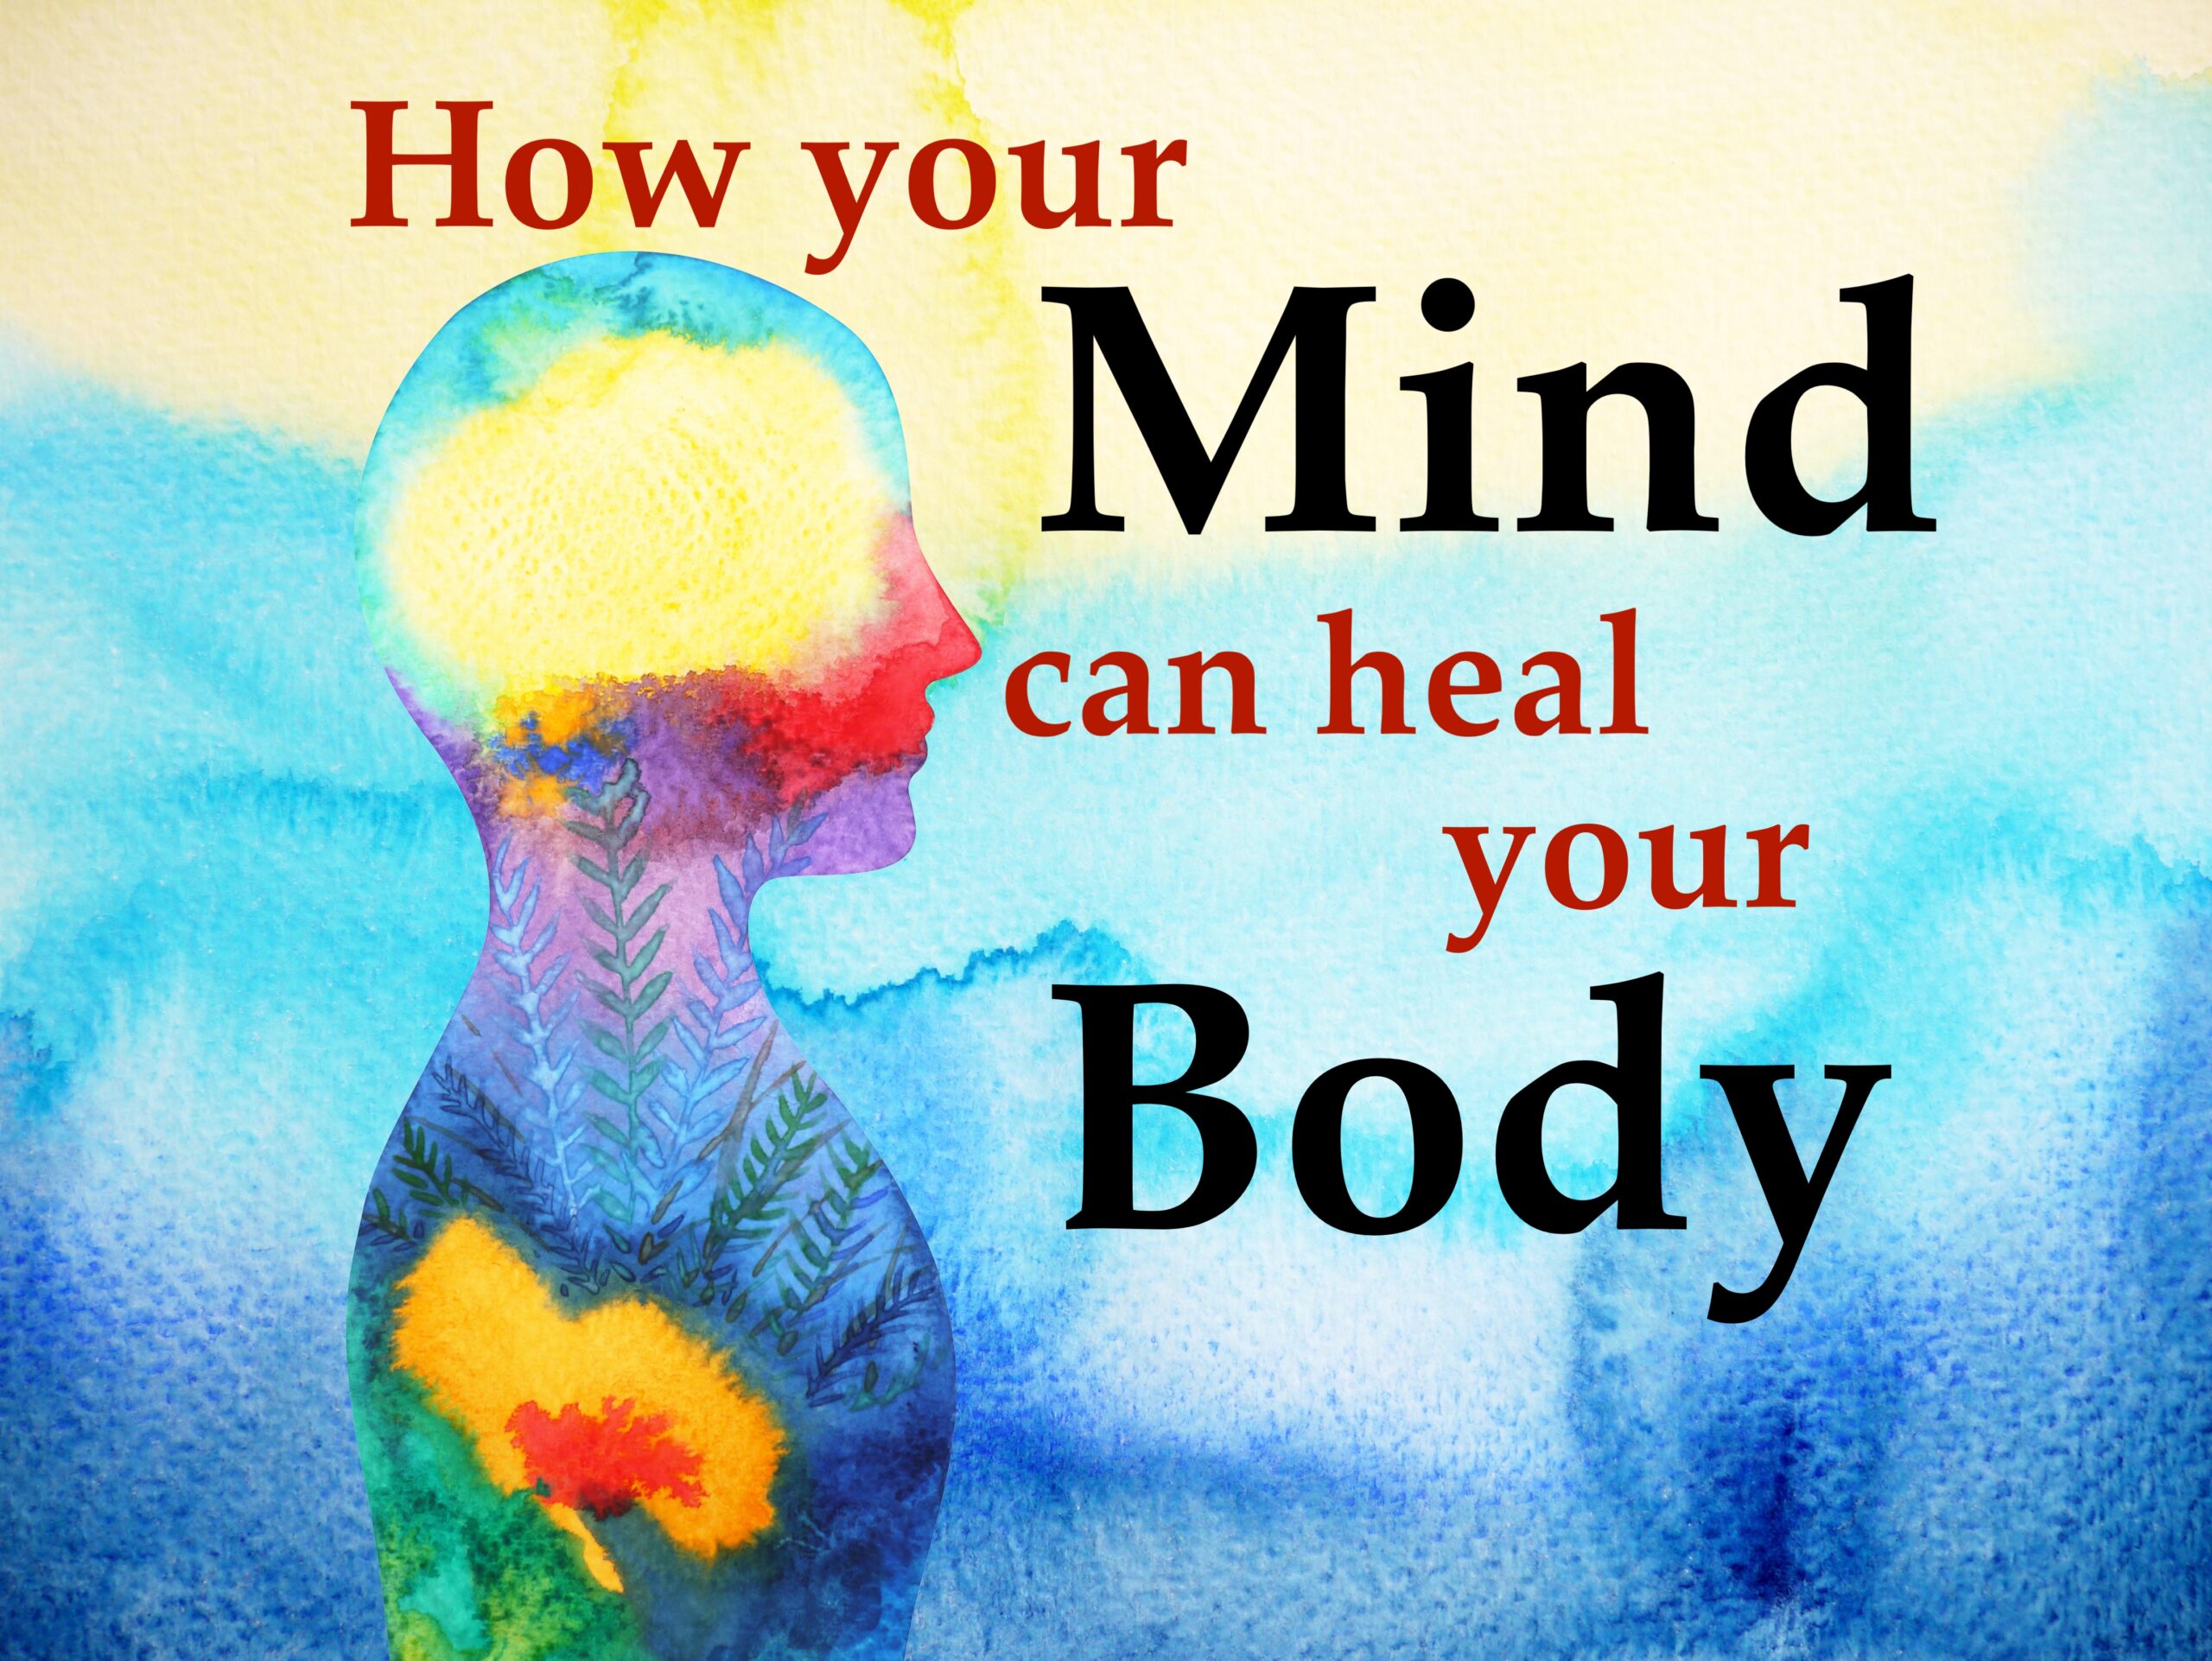 pastel image of human body with vibrant colours inside and the text "How your mind can heal your body" beside it.